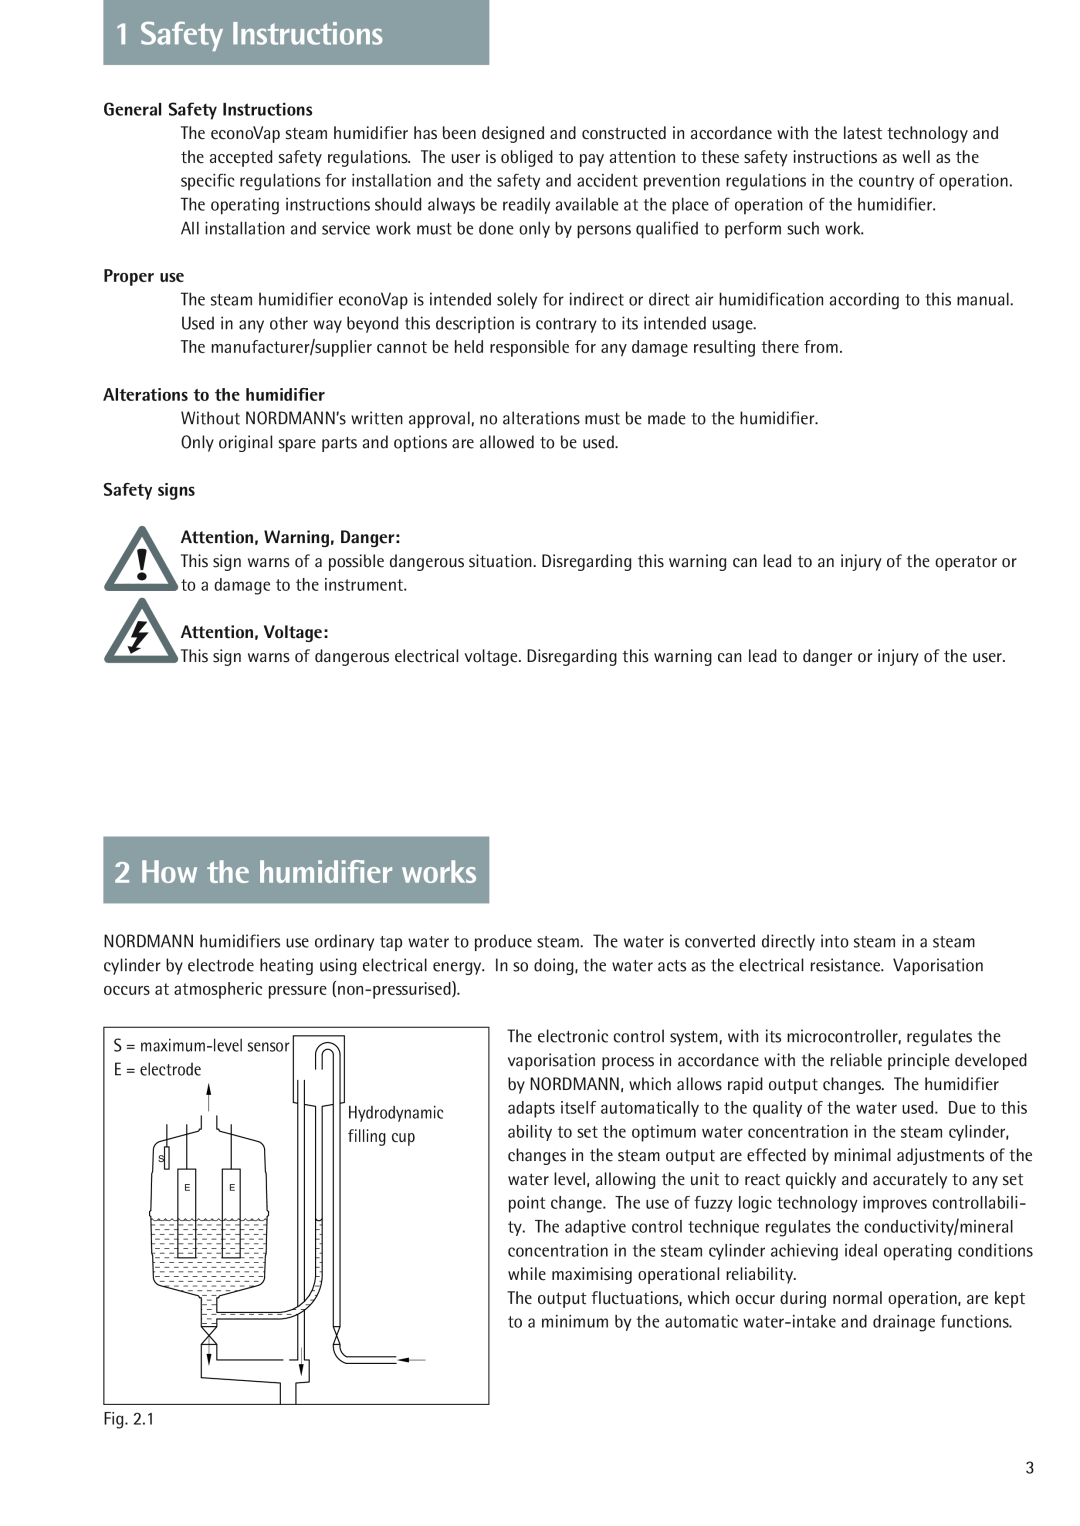 Nordmende 2401935EN0801 manual How the humidifier works, General Safety Instructions, Proper use, Attention, Voltage 